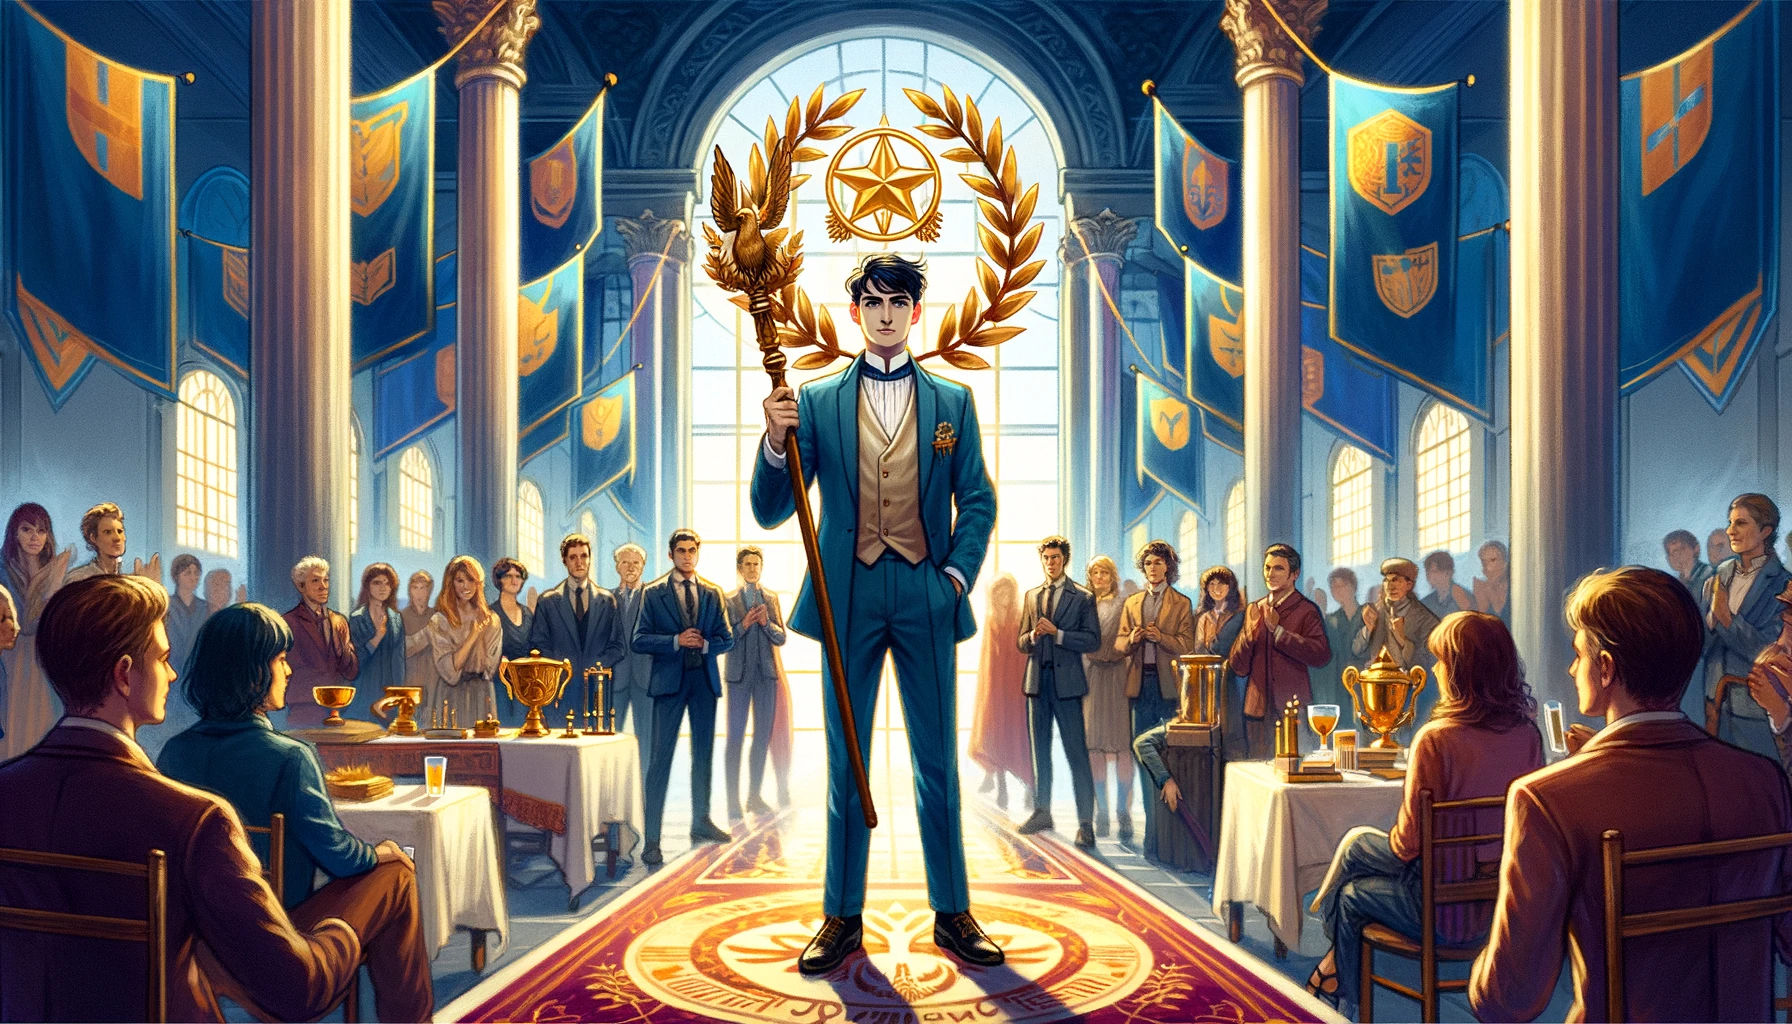 An illustration depicting an individual embodying victory, recognition, and leadership. The person is portrayed as a celebrated leader and influencer, surrounded by symbols of success and celebration. The scene emphasizes personal triumph, admiration from peers, and the rewards of perseverance and hard work.